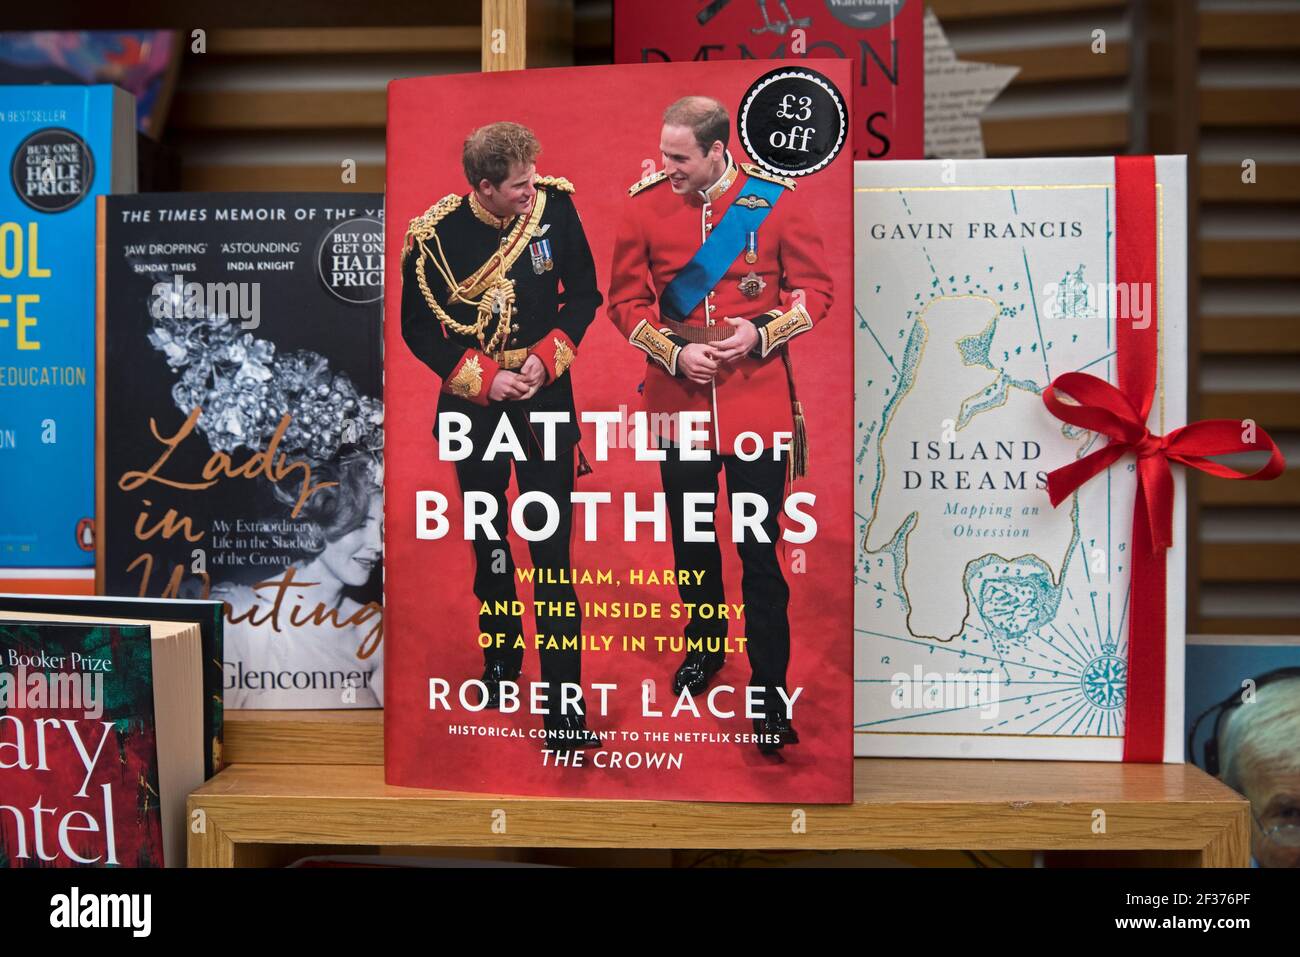 Copy of 'Battle of Brothers' by Robert Lacey on display in the window of Waterstones bookshop, Princes Street, Edinburgh, Scotland, UK. Stock Photo